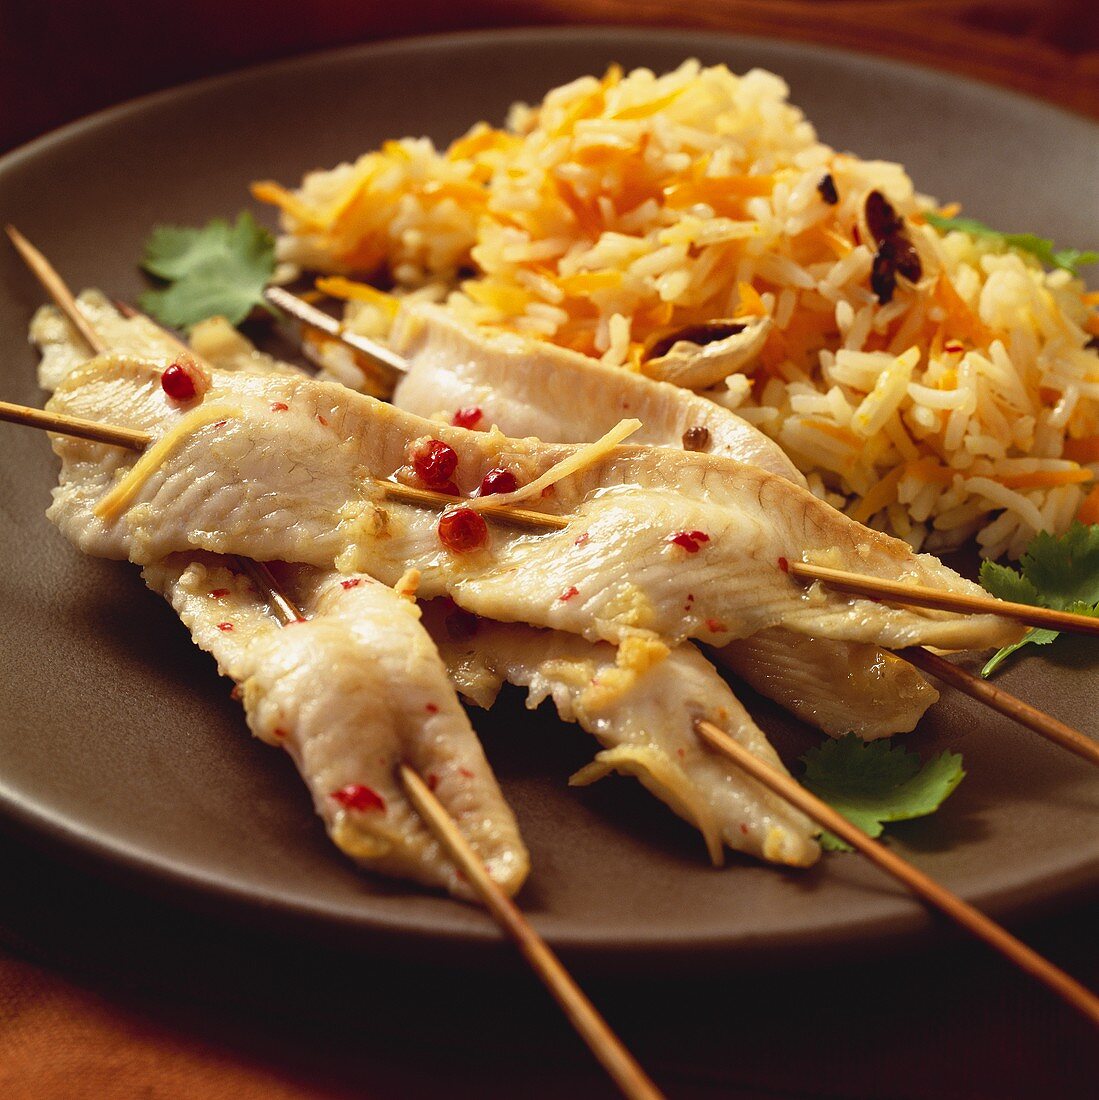 Sole fillet kebabs with pink pepper and rice